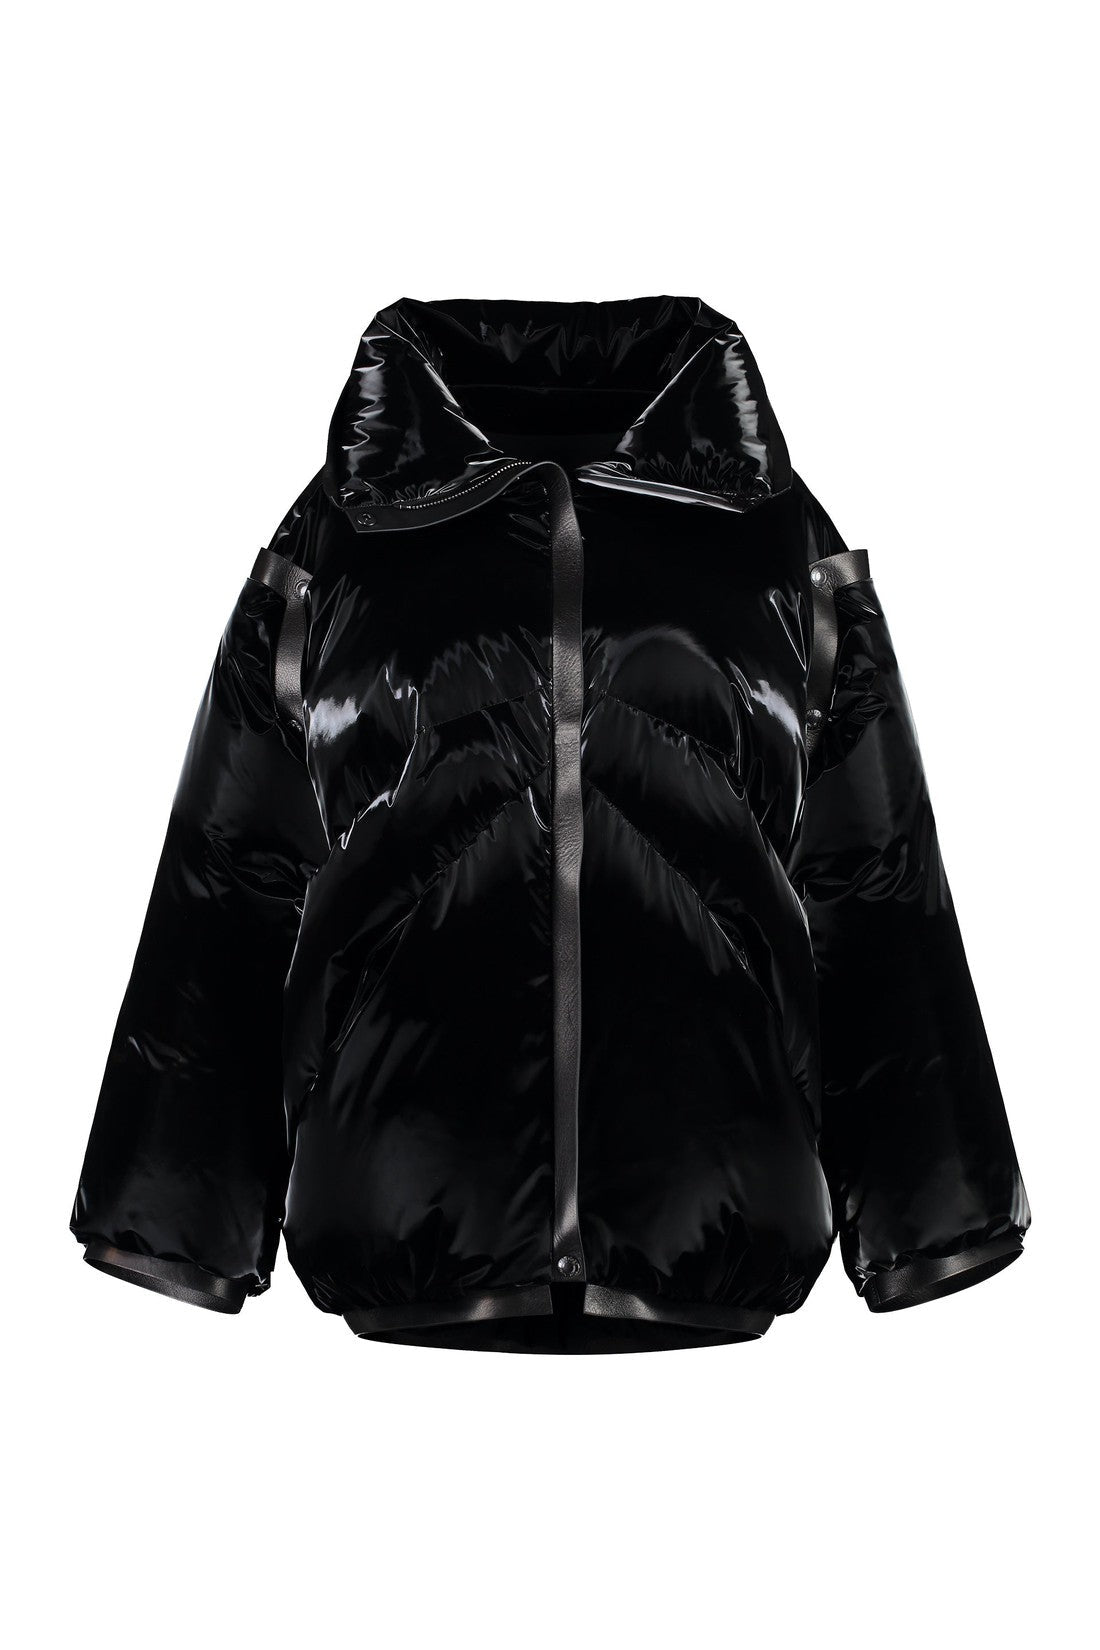 Tom Ford-OUTLET-SALE-Glossy nylon down jacket-ARCHIVIST